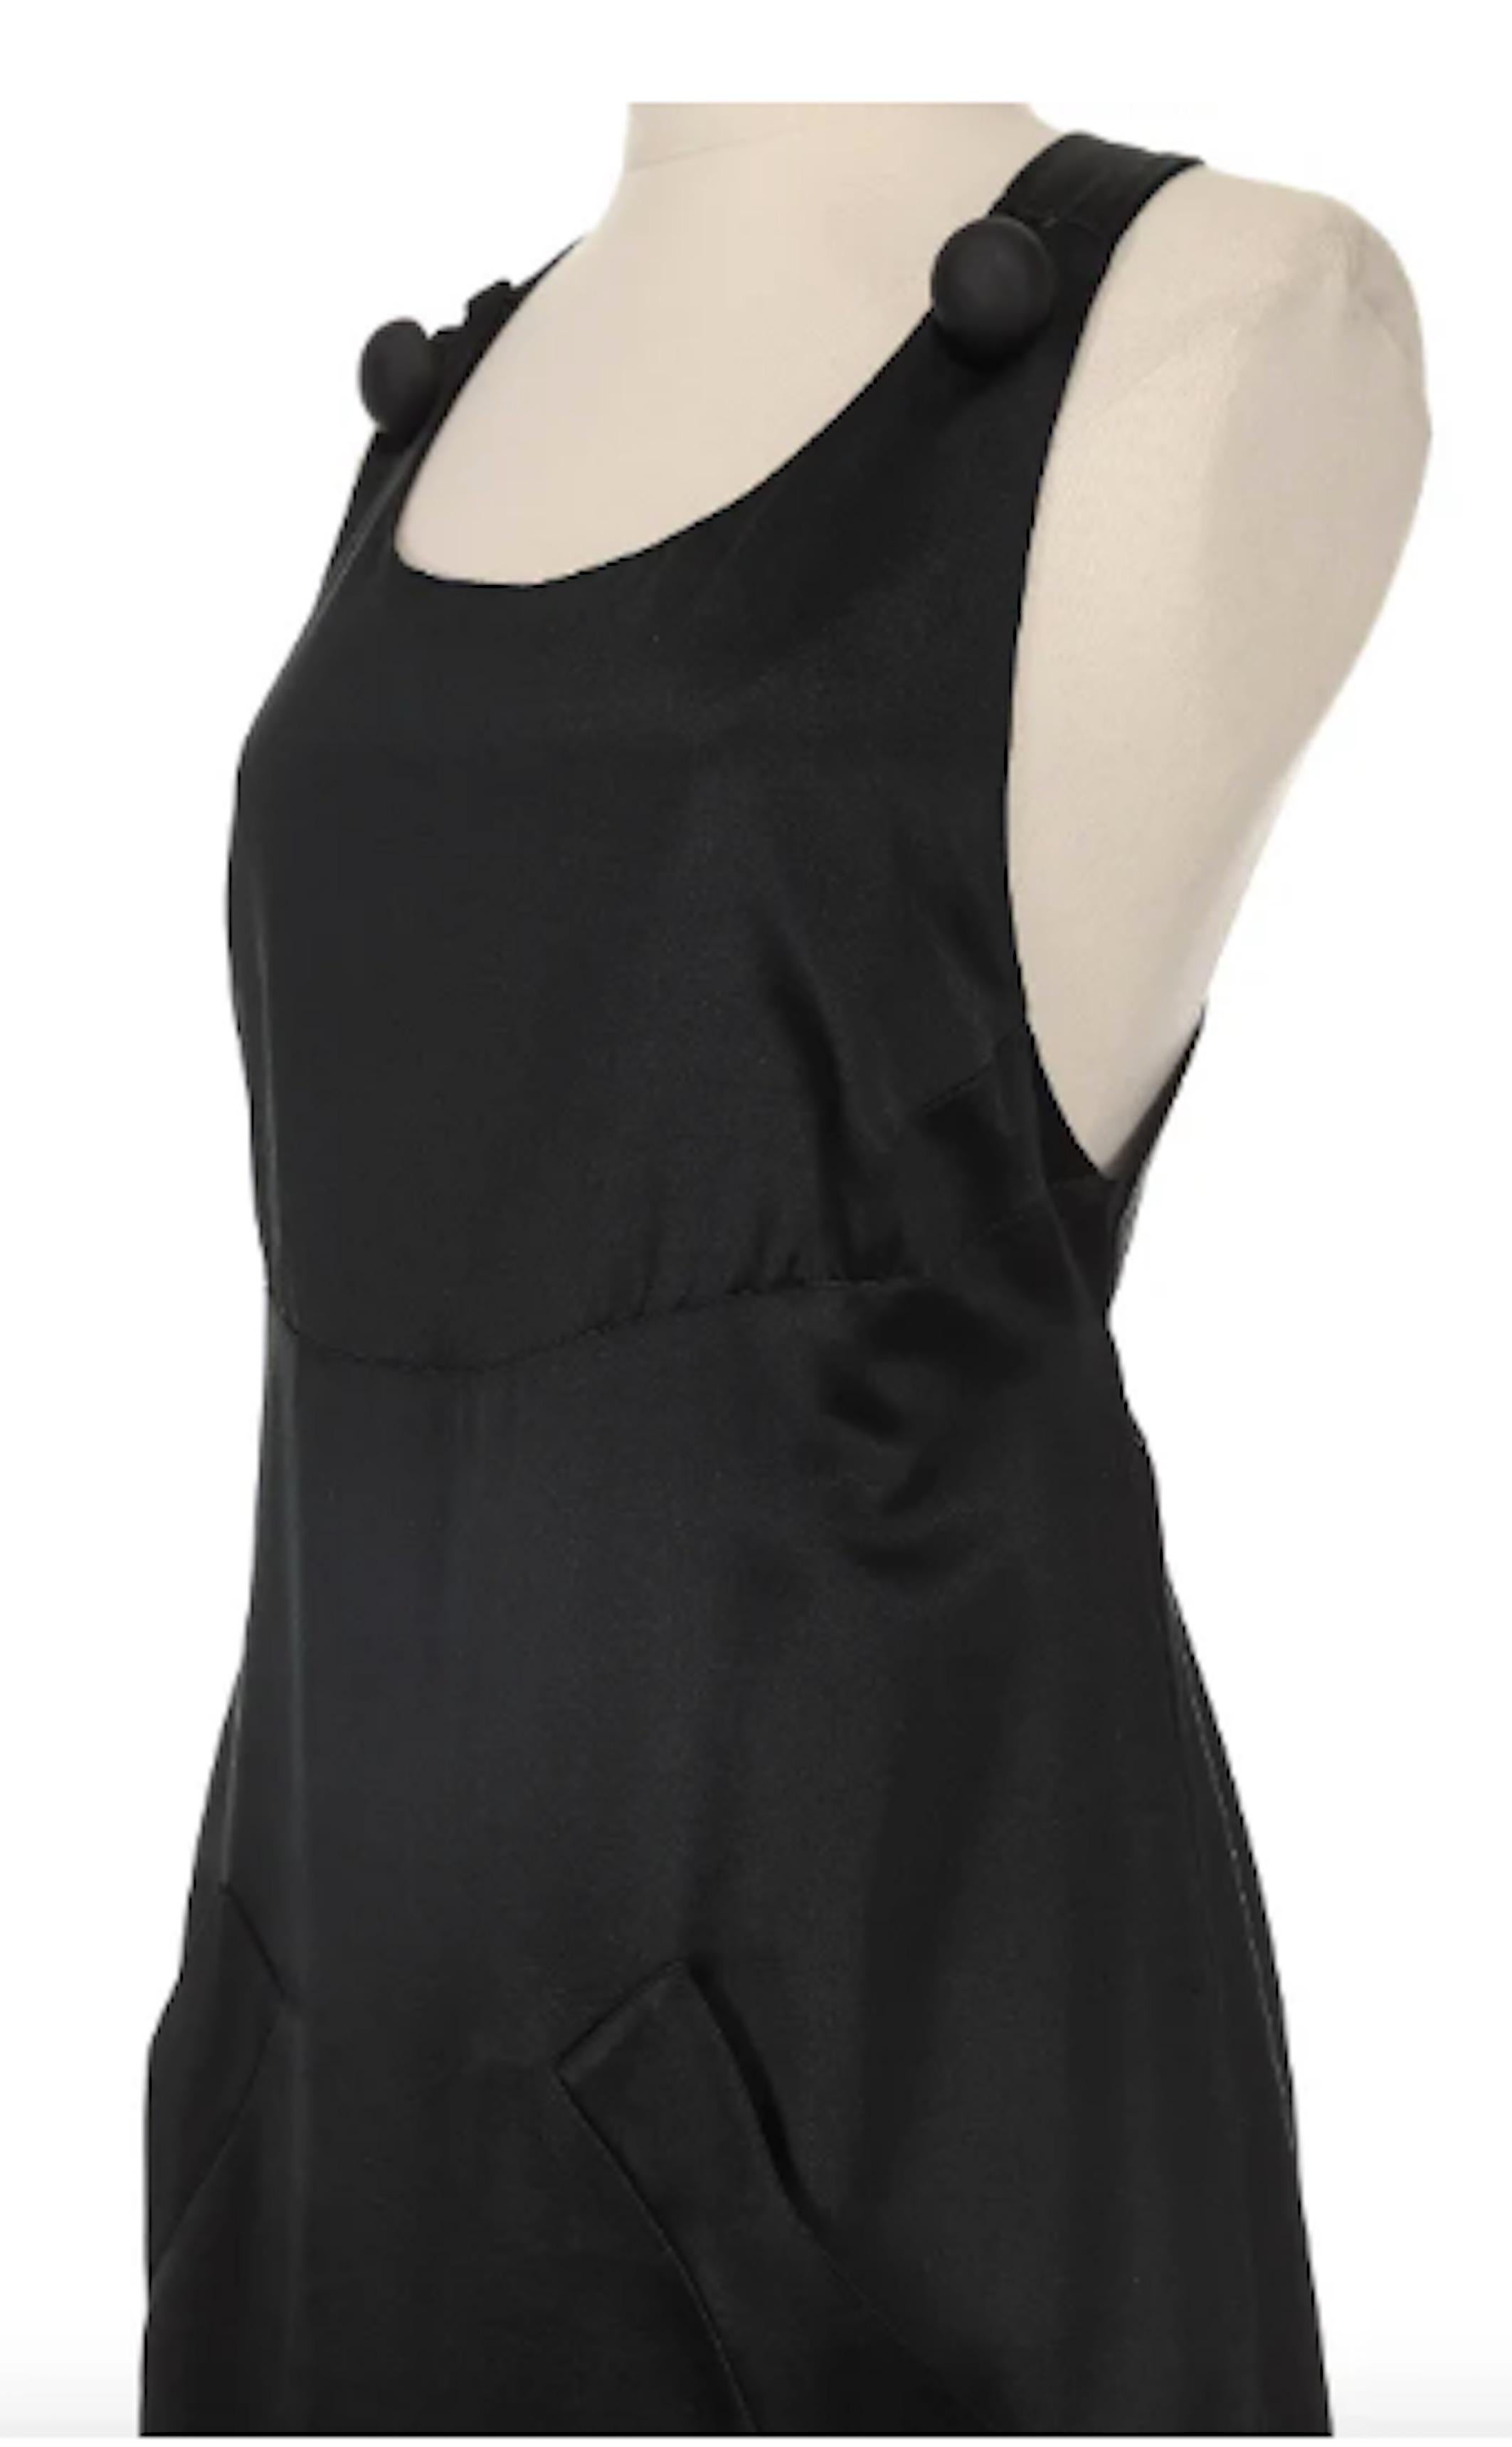 Karl Lagerfeld Silk Black Cocktail Dress In Excellent Condition For Sale In New York, NY